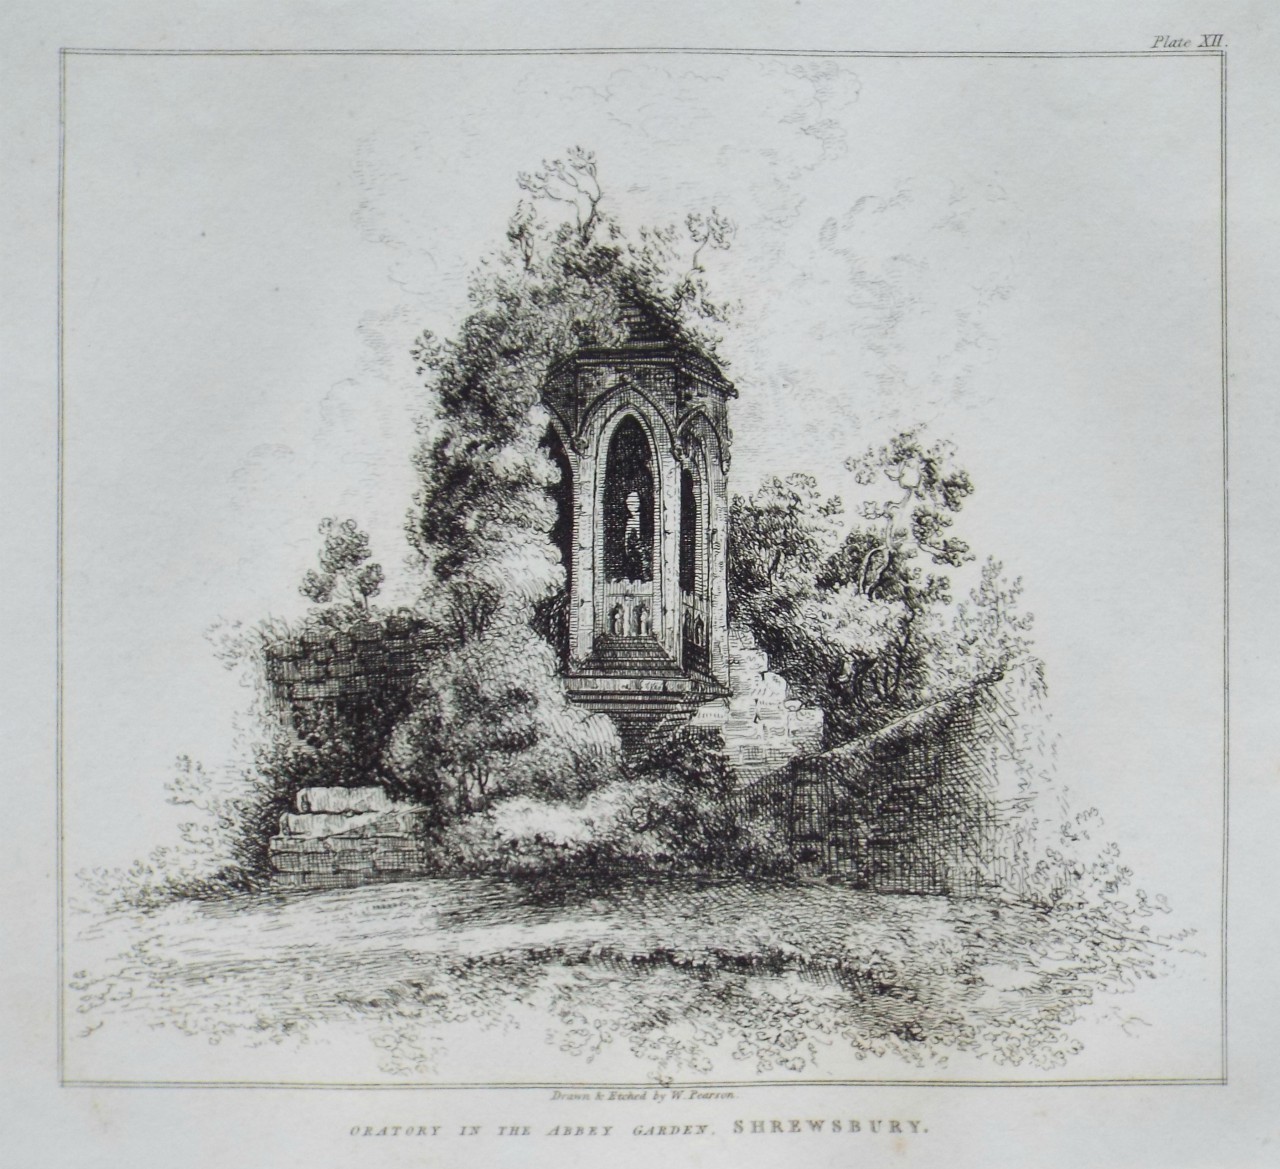 Etching - The Oratory in the Abbey Garden, Shrewsbury. - Pearson